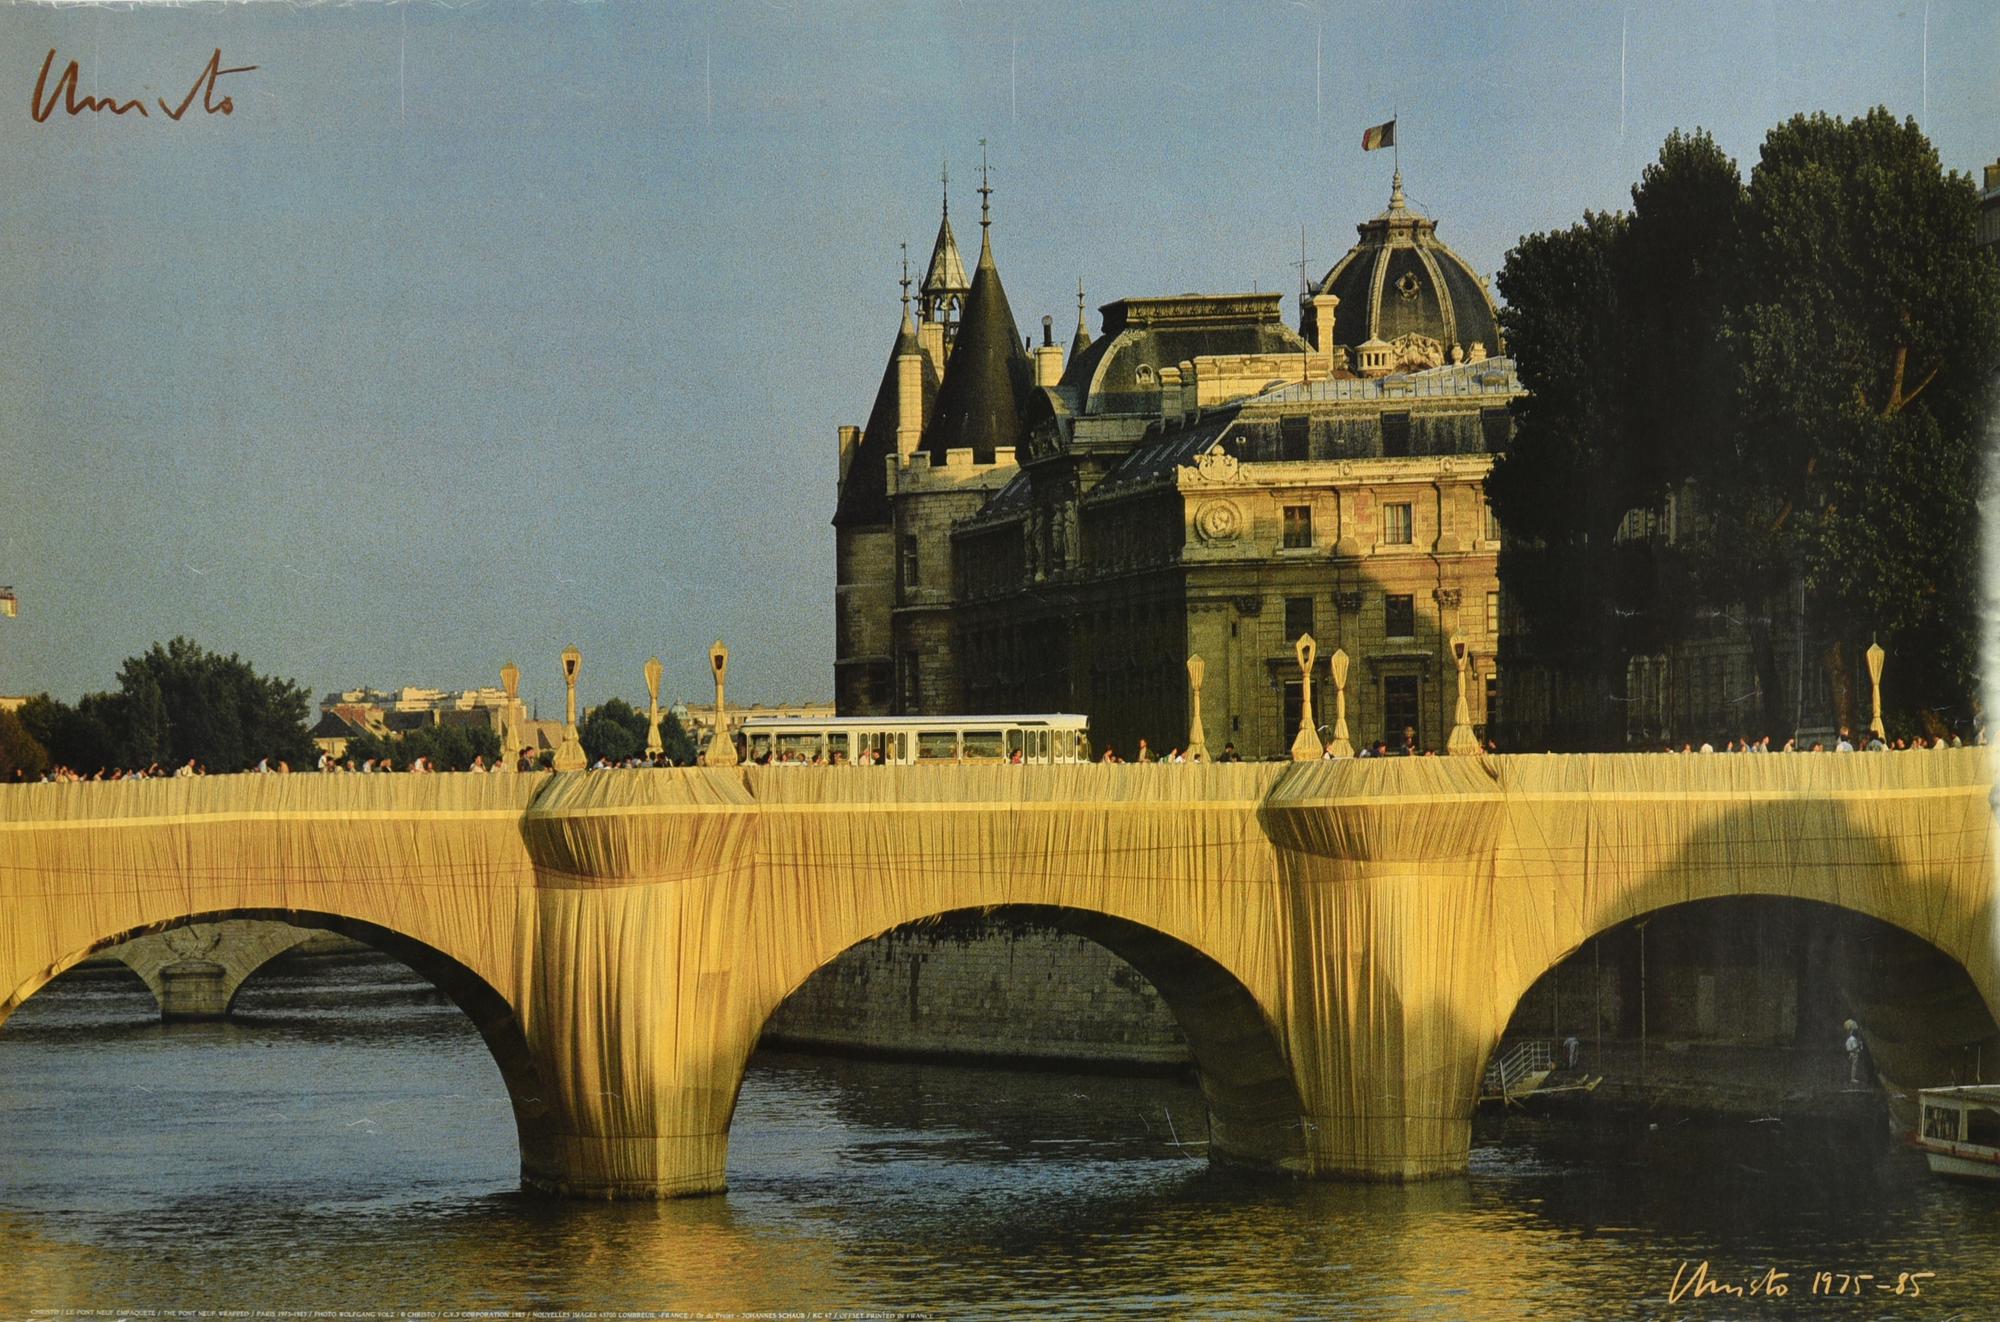 Christo & Jeanne Claude PONT NEUF, WRAPPED stampa tipografica, cm 62x95